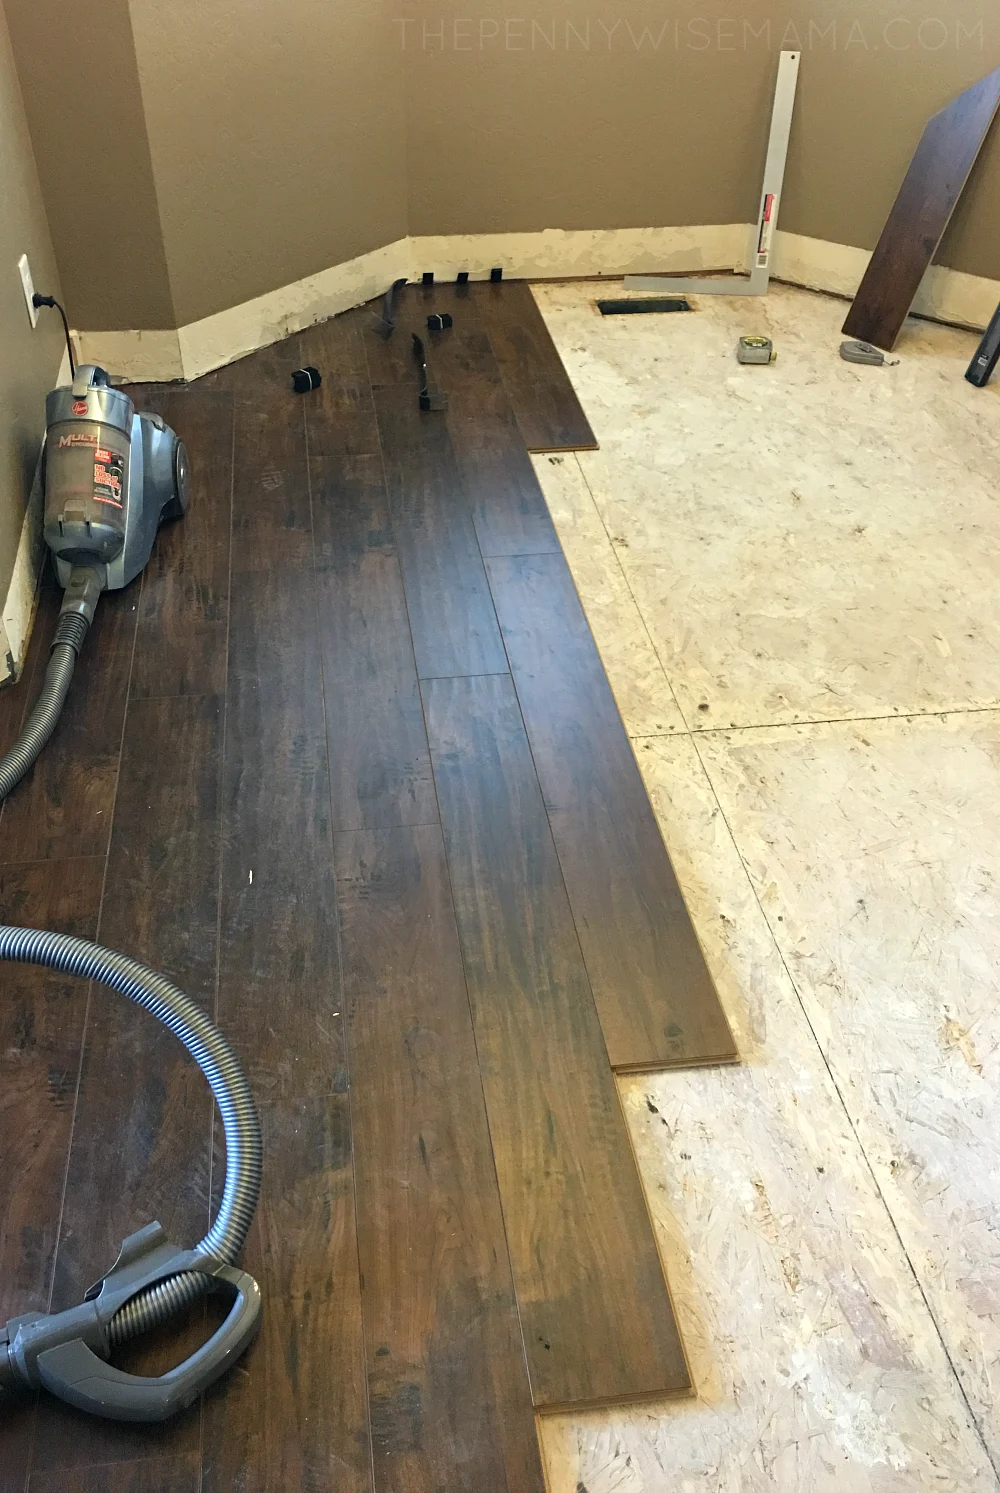 Diy Select Surfaces Laminate Flooring Our Big Reveal The Pennywisemama